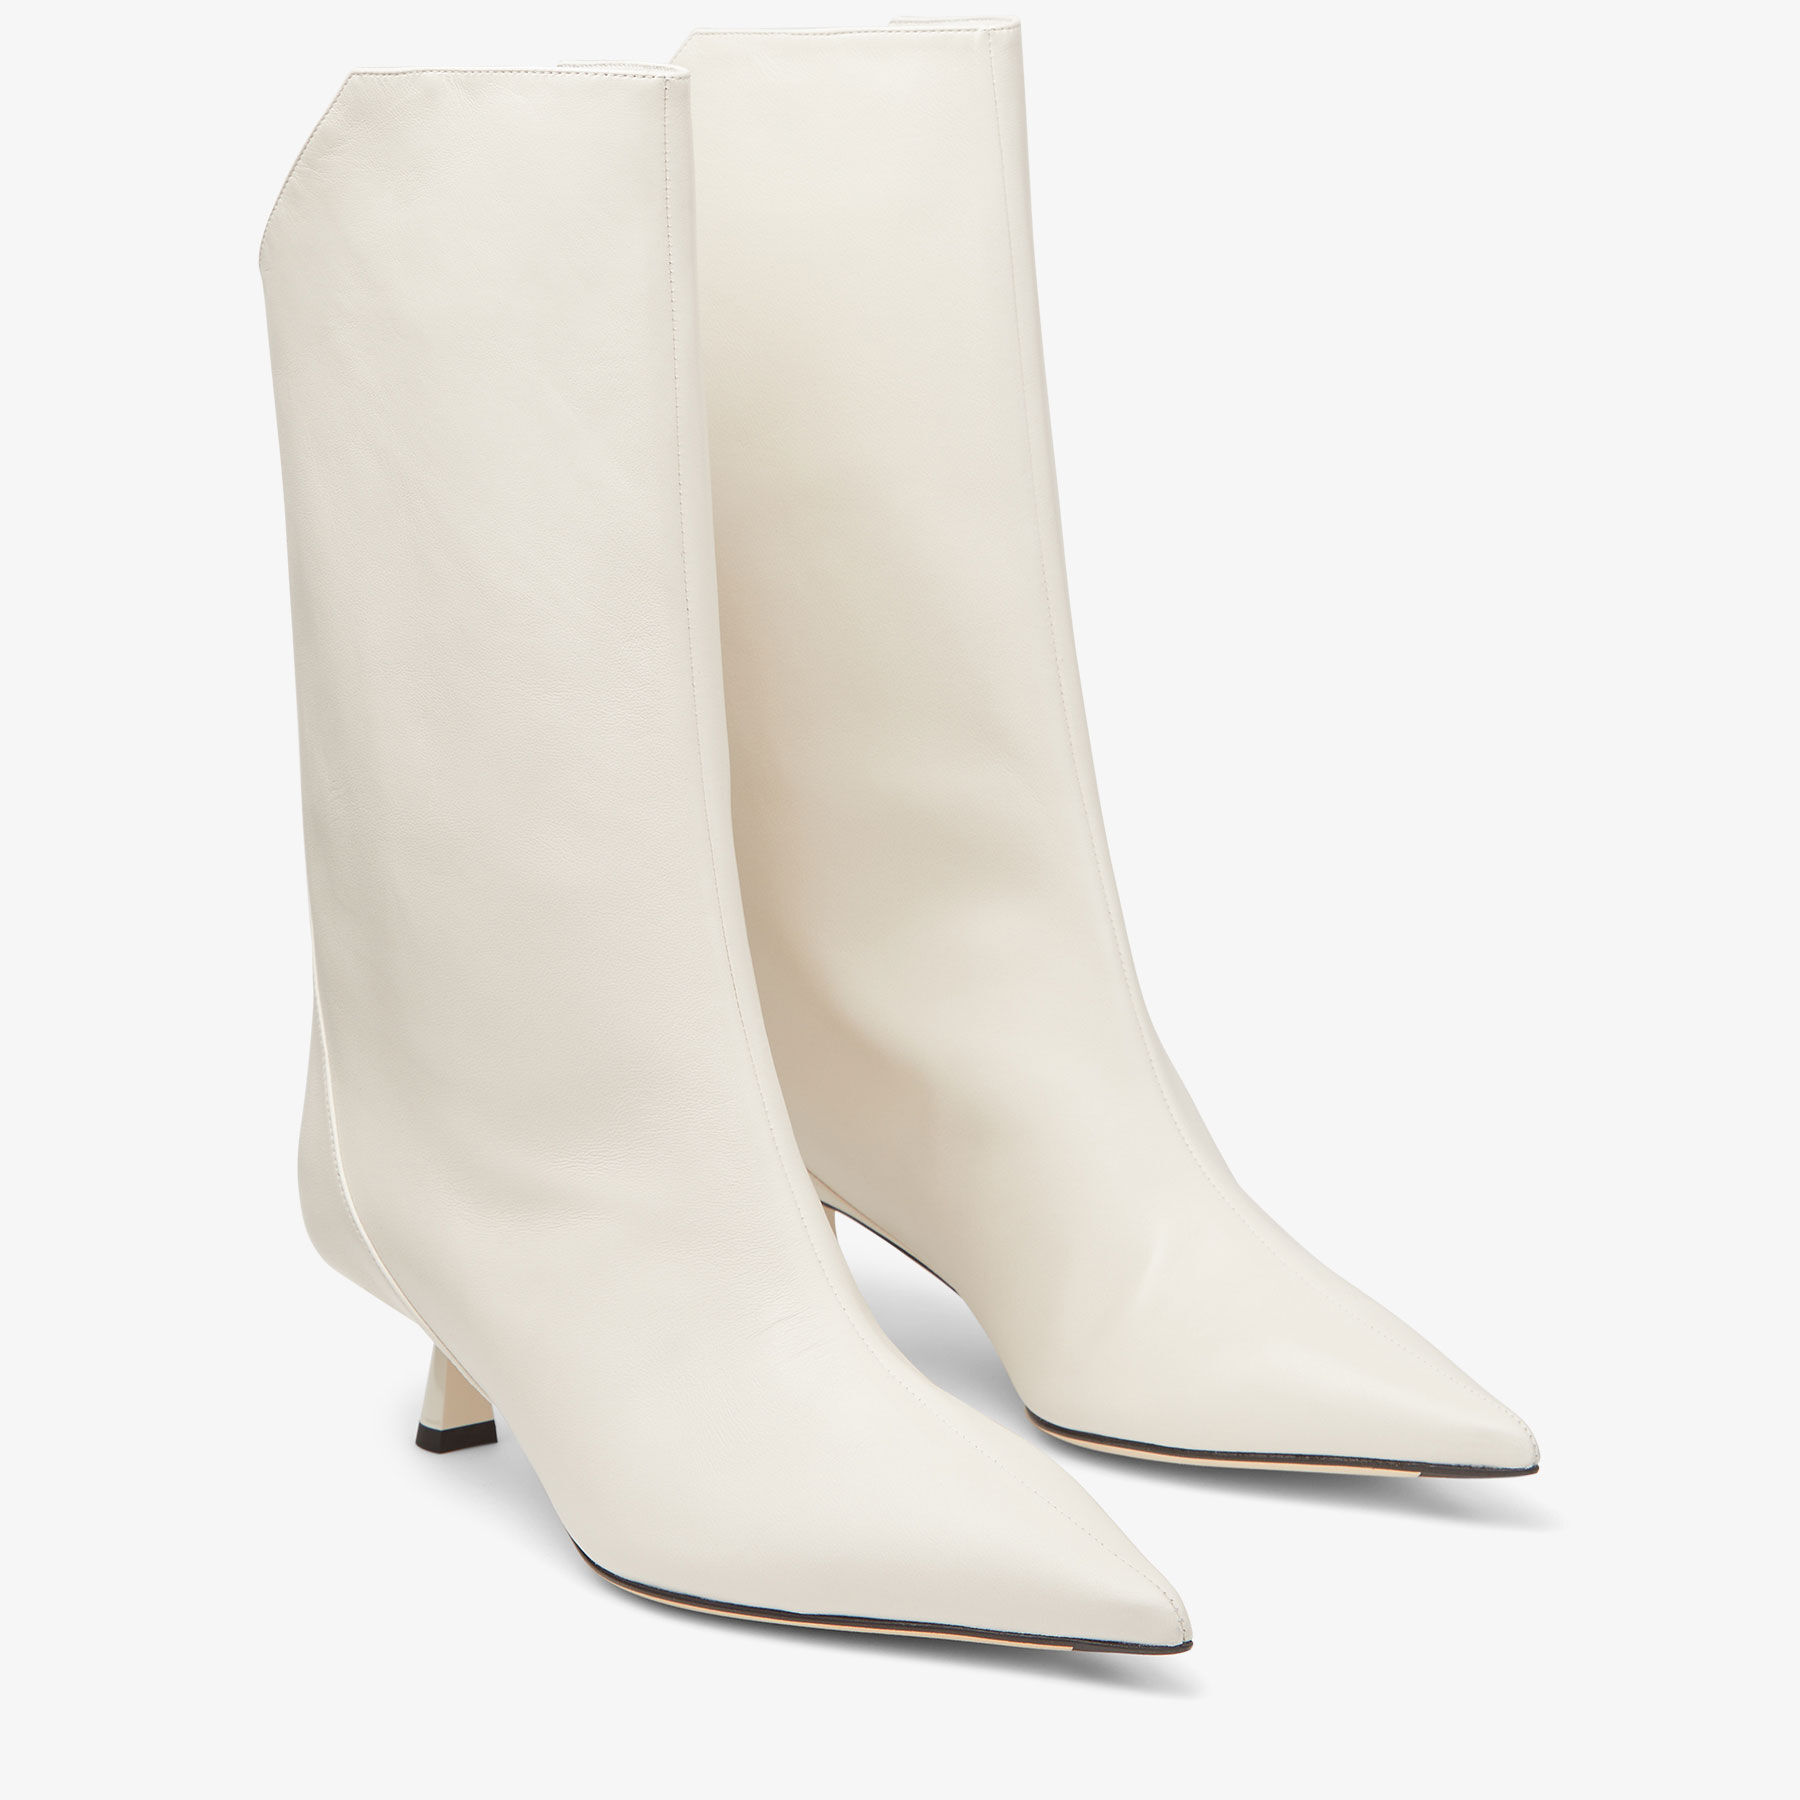 Latte Luxe Nappa Leather Over-the-Knee Boots | VARI AB 45 | Autumn 2022 ...